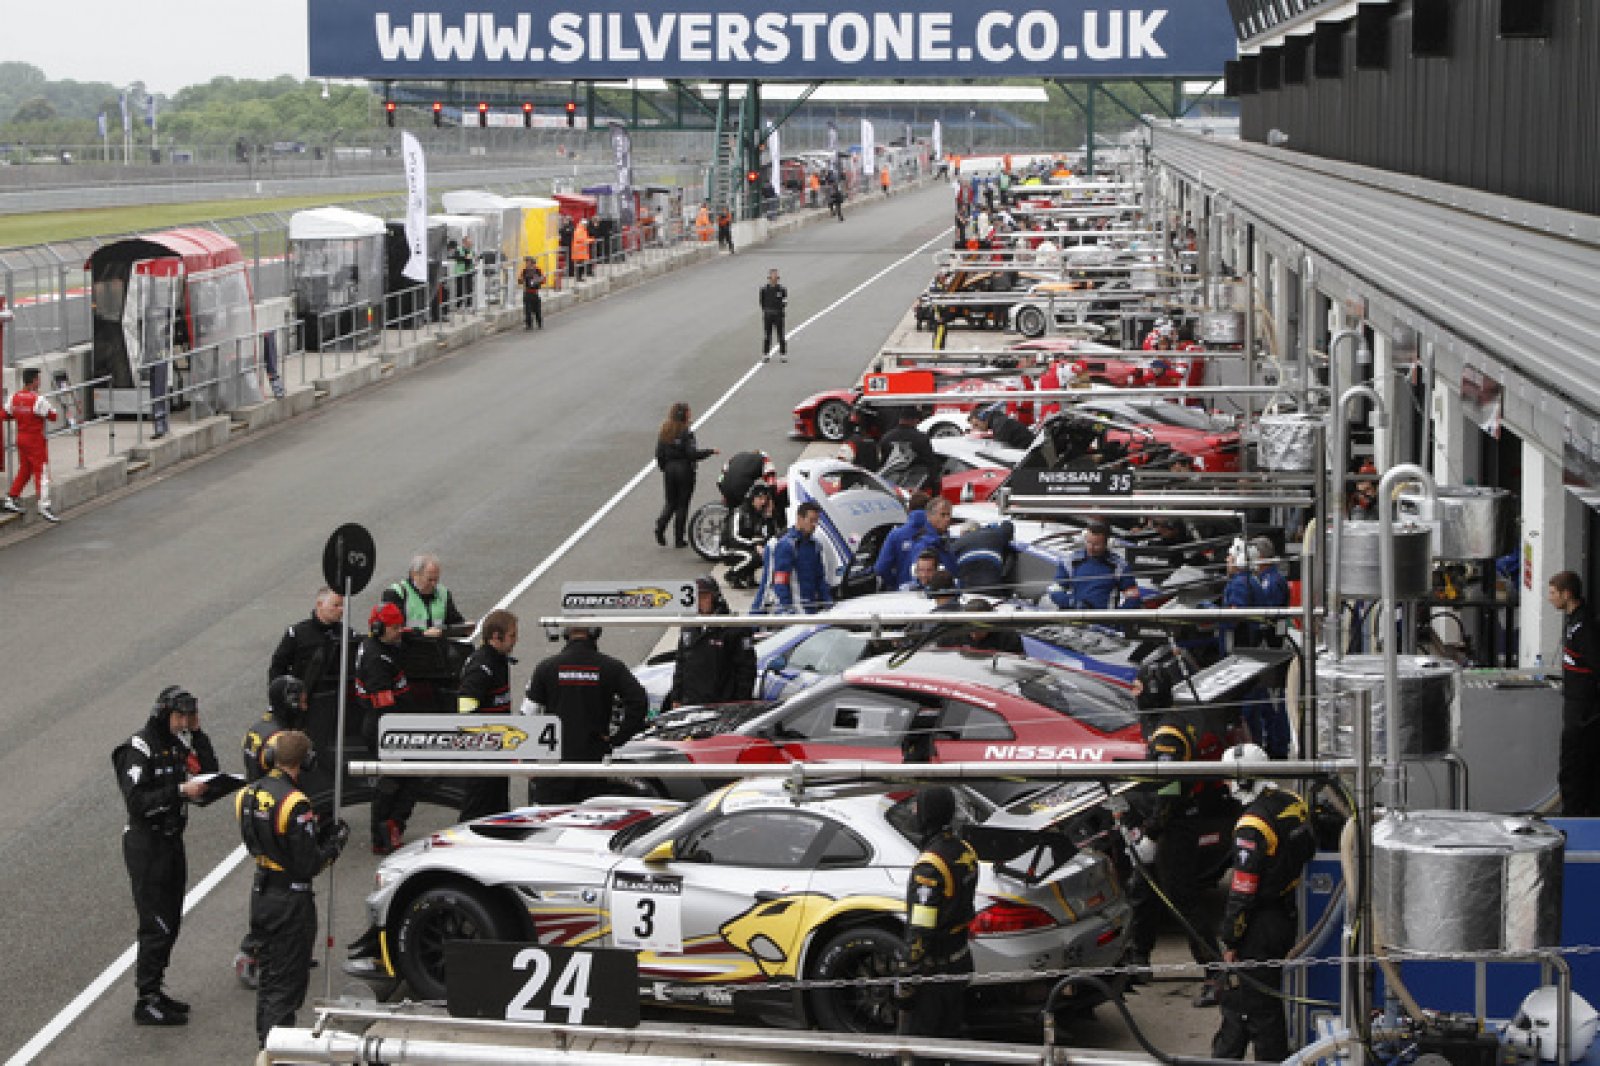 EPIC SILVERSTONE SHOWDOWN FOR COLOSSAL GT3 GRID